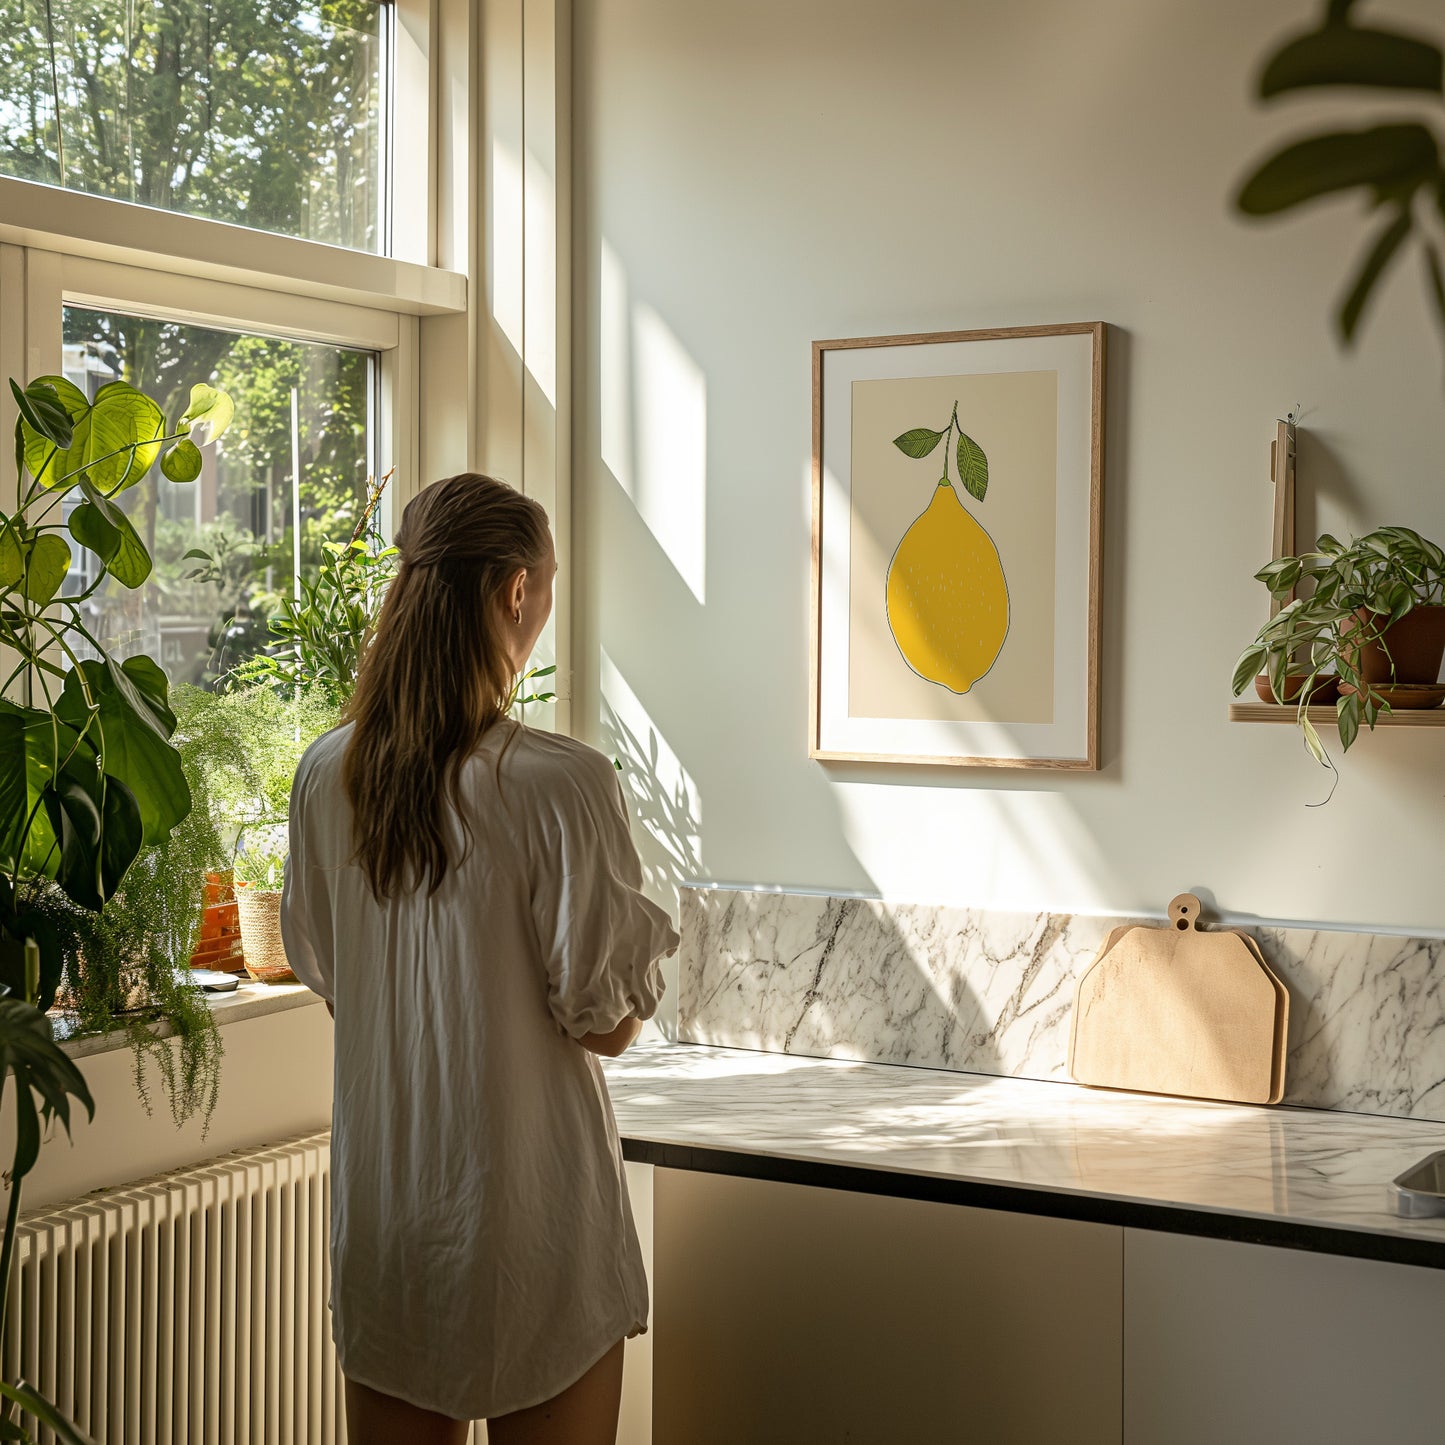 A person in a white shirt looking out a sunlit window in a room with plants and a lemon artwork.